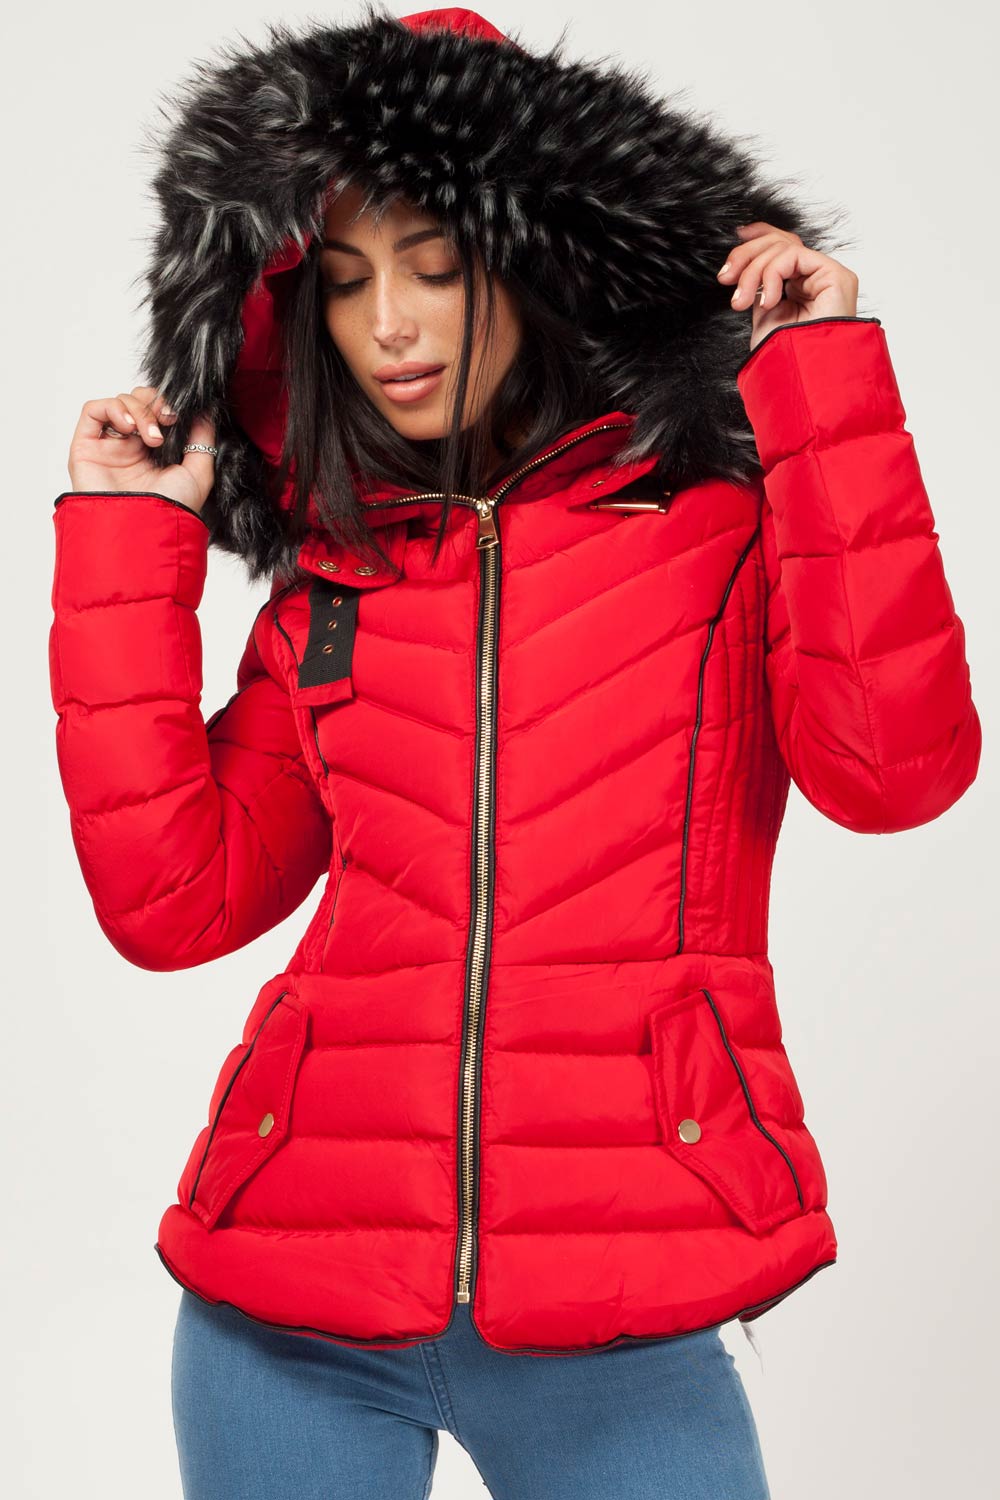 red puffer coat with fur hood 